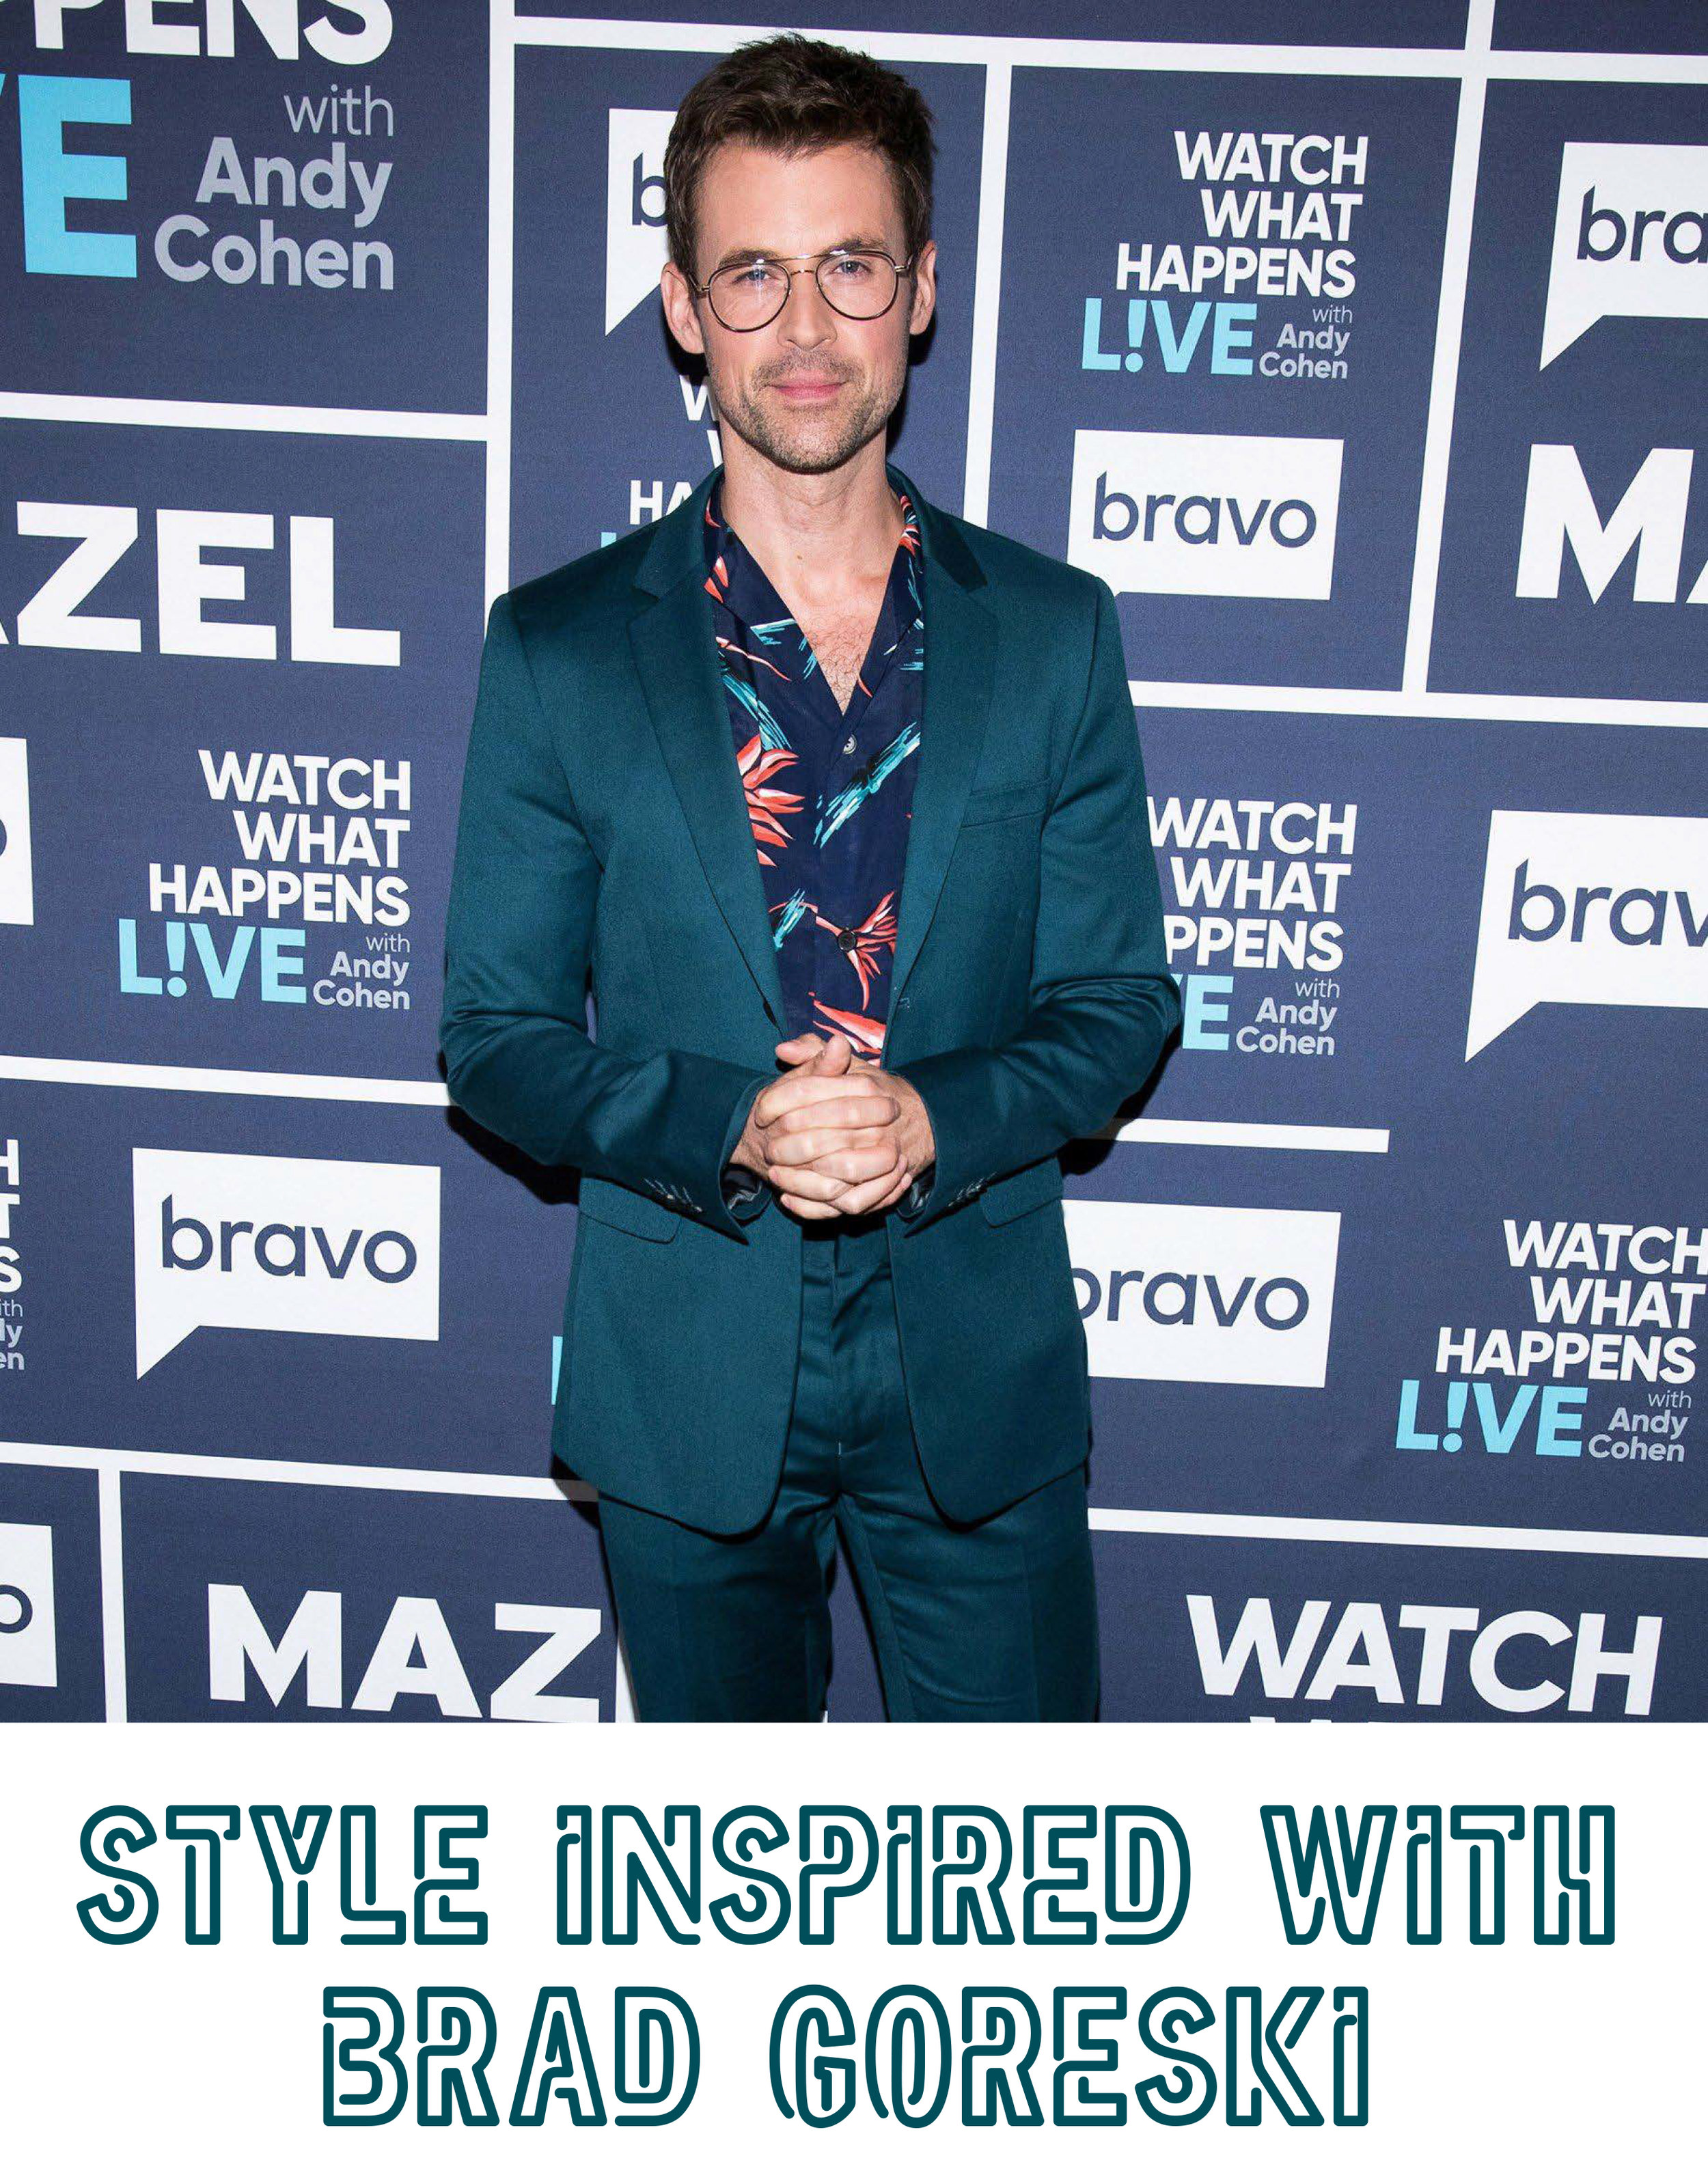 Rachel Zoe Comments on Brad Goreski Falling Out, Where They Stand